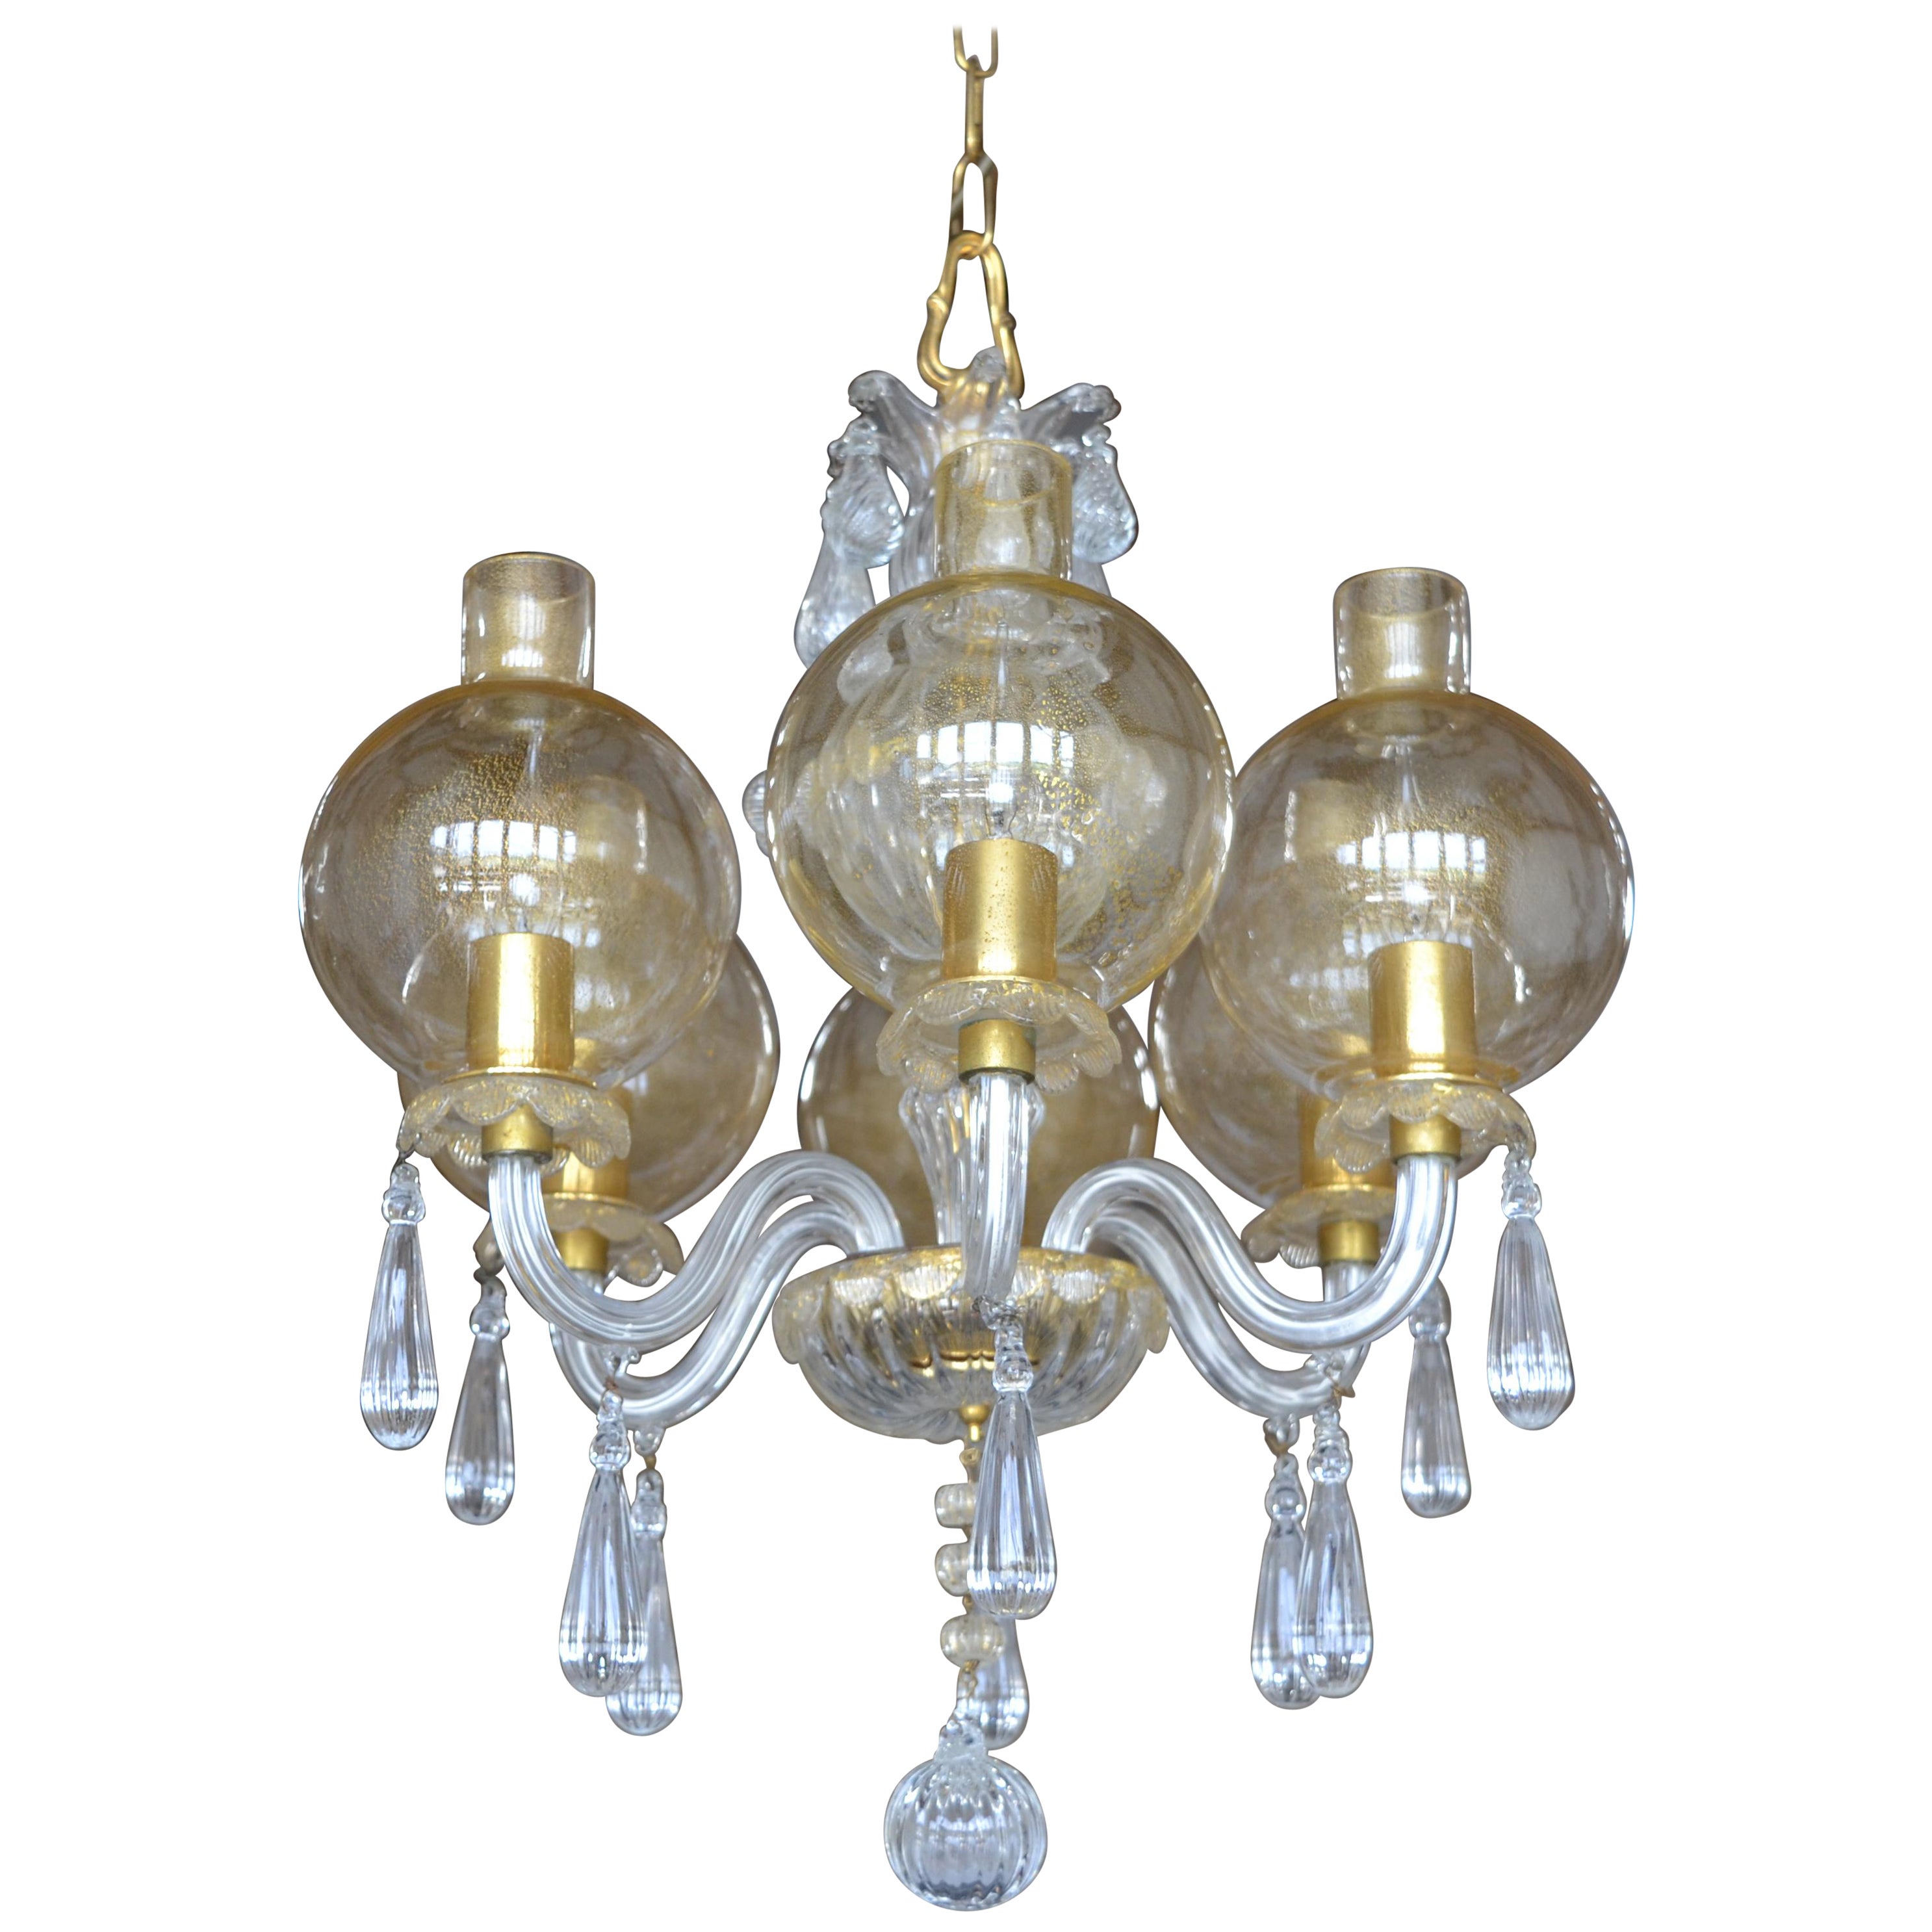 Mid-Century Venetian 6 light Chandelier with unusual Gold Storm Shades 